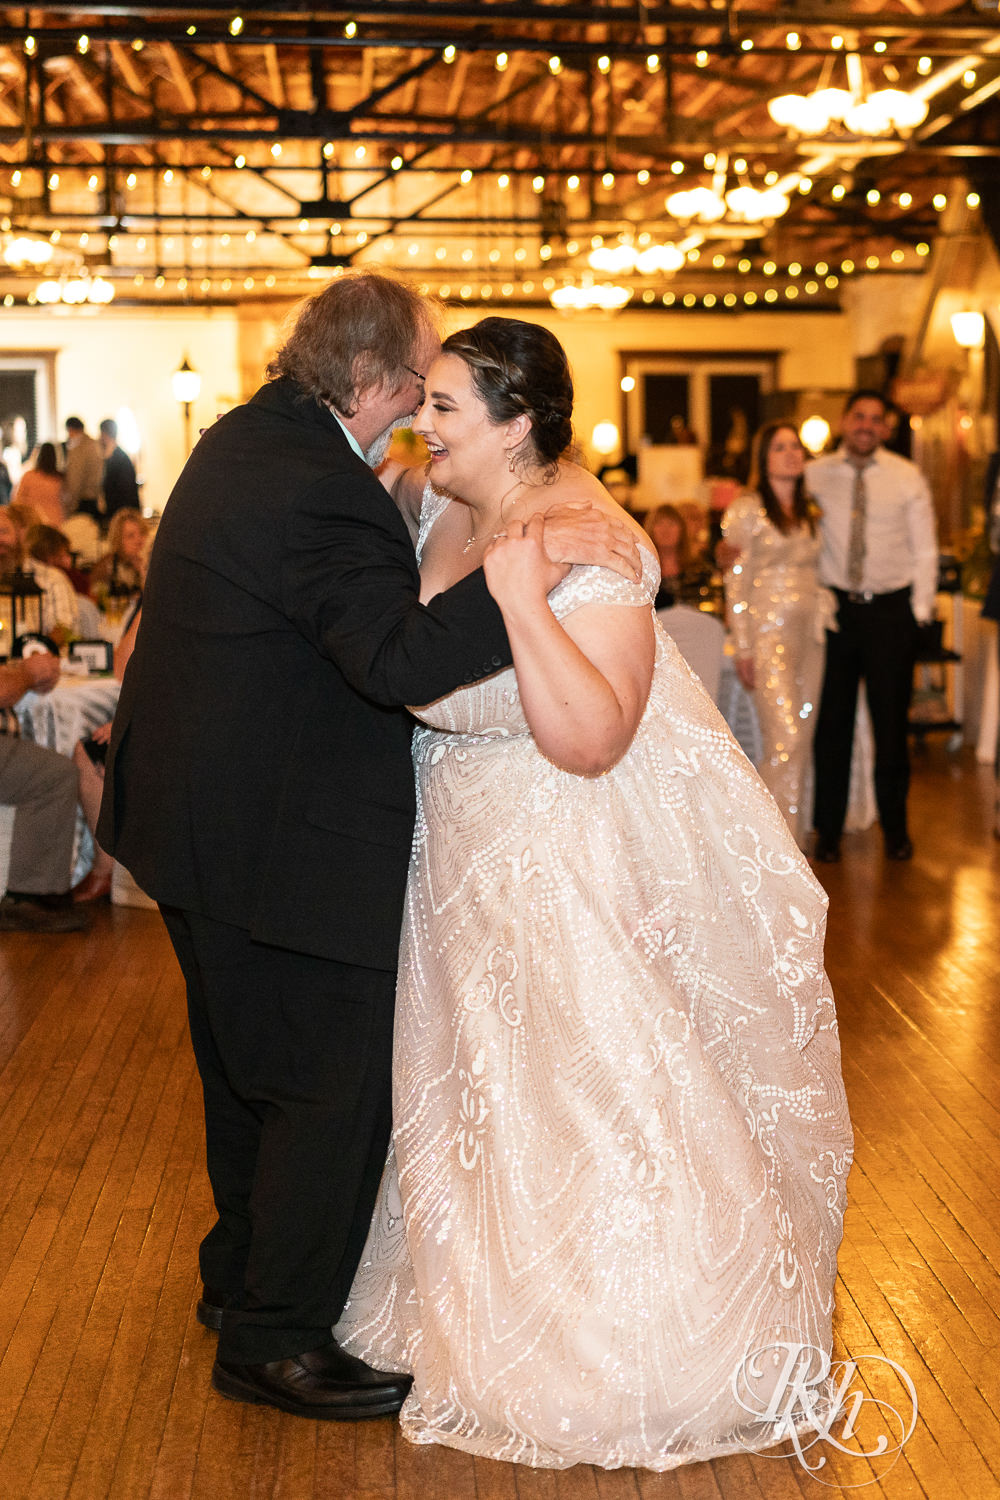 Bride and dad dance at wedding reception at Kellerman's Event Center in White Bear Lake, Minnesota.